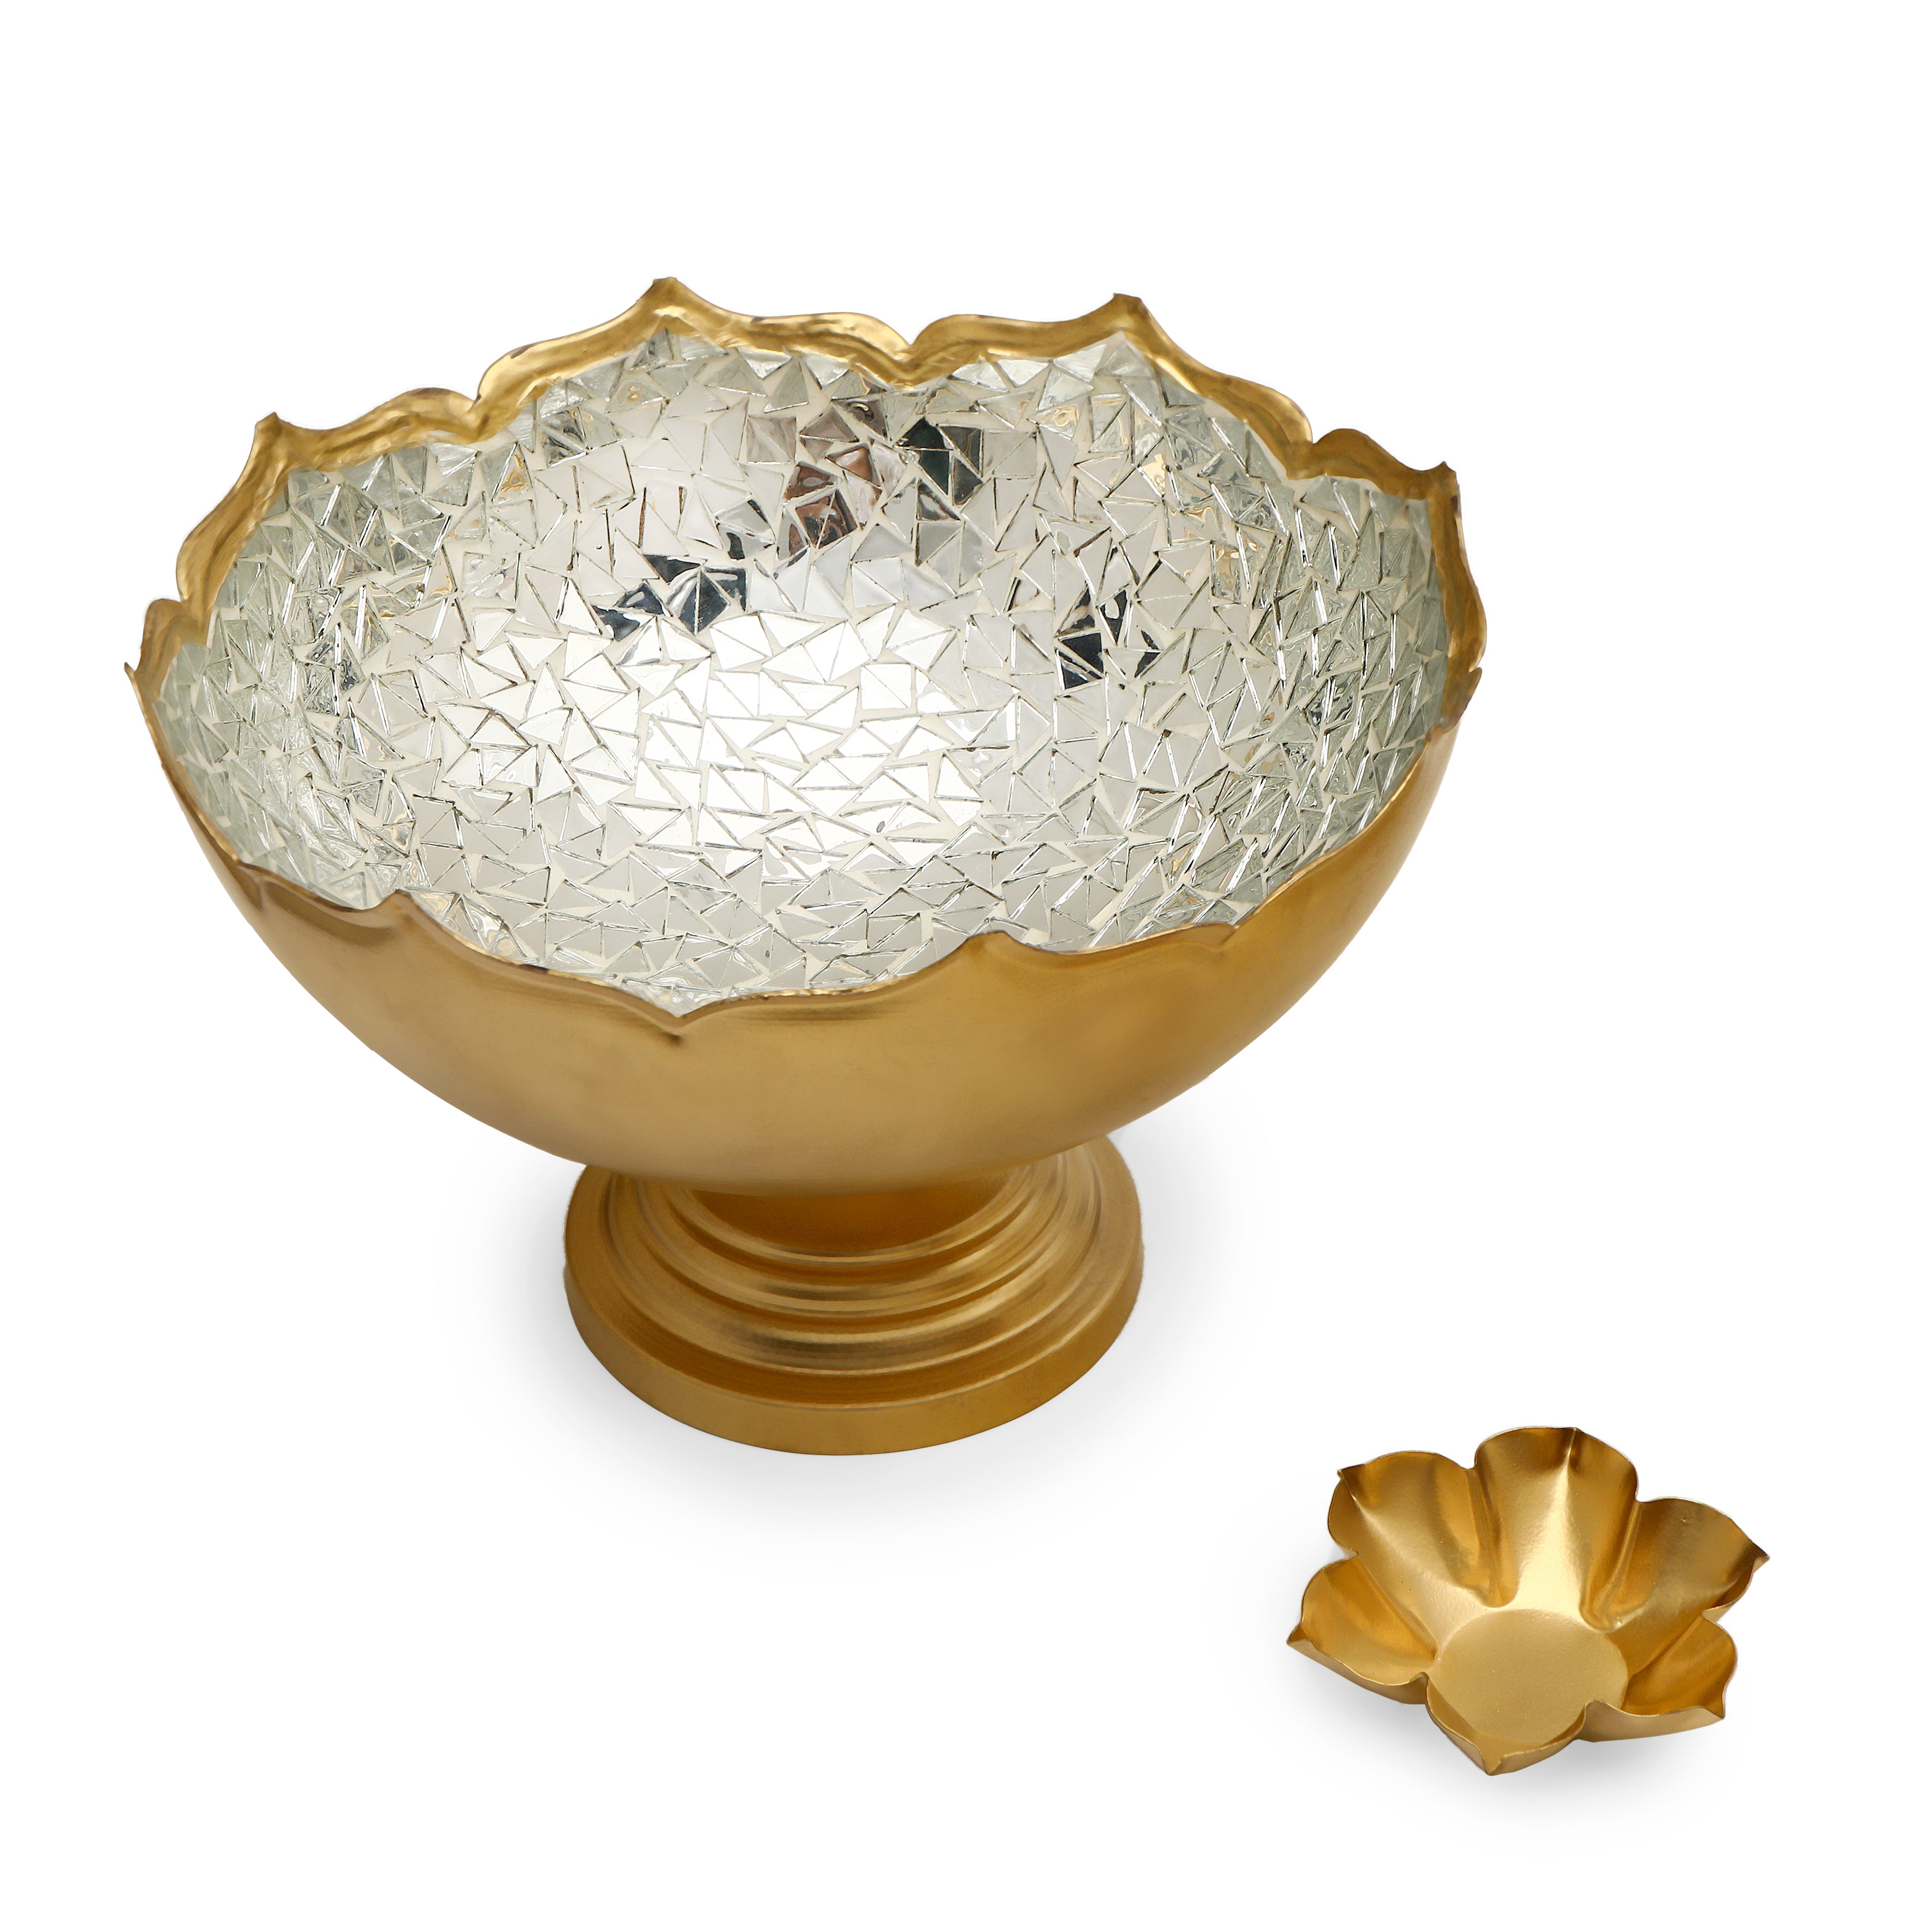 Silver Mosaic Urli with Stand 10.5" Inch (Medium) - The Home Co.